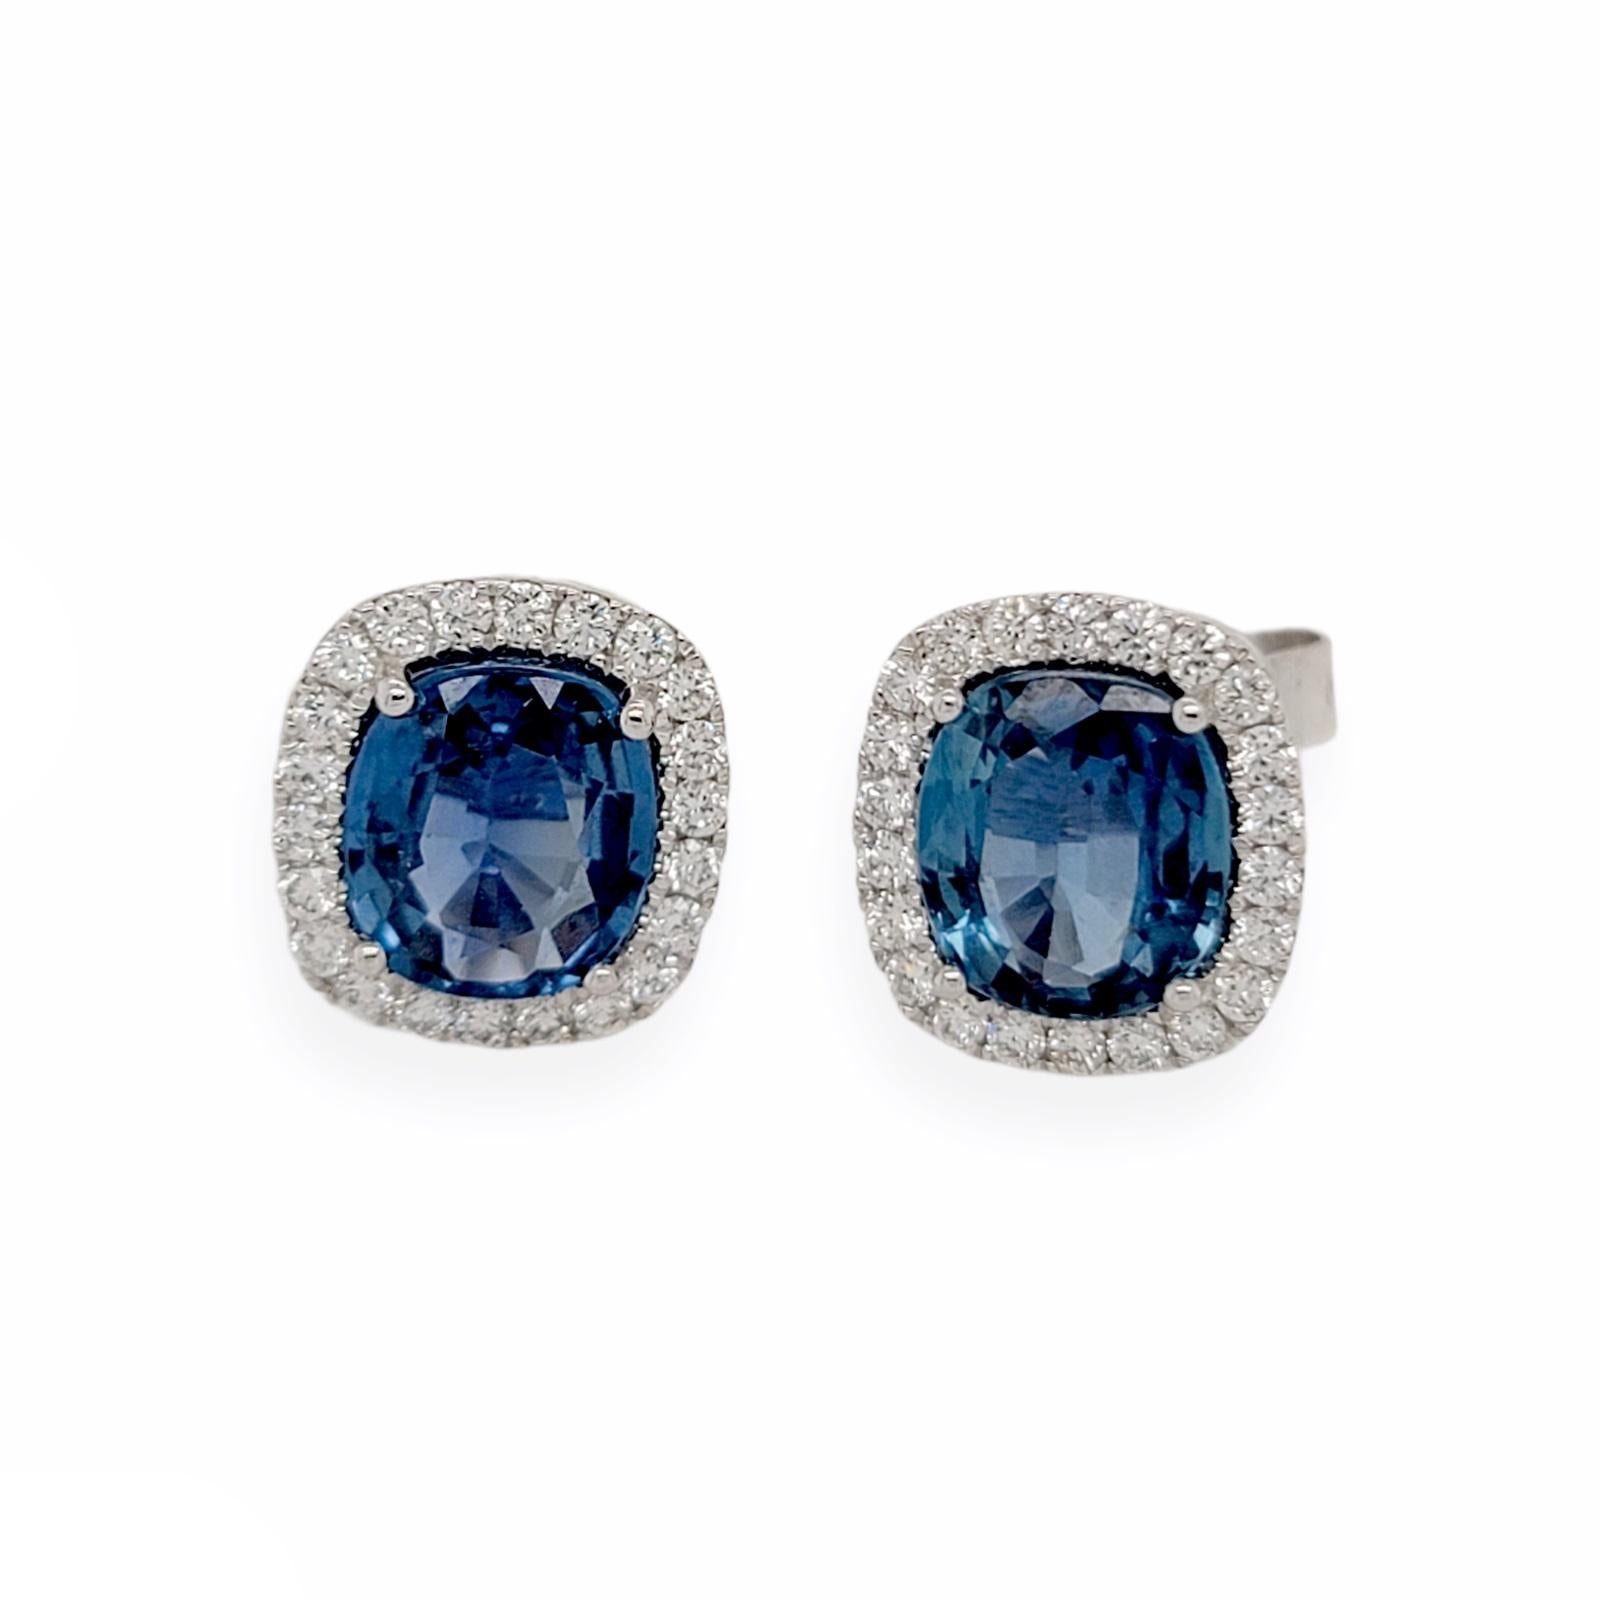 Round Cut 3.84 CT Natural Blue Sapphire & 0.52 CT Diamonds 14K White Gold Stud Earrings For Sale